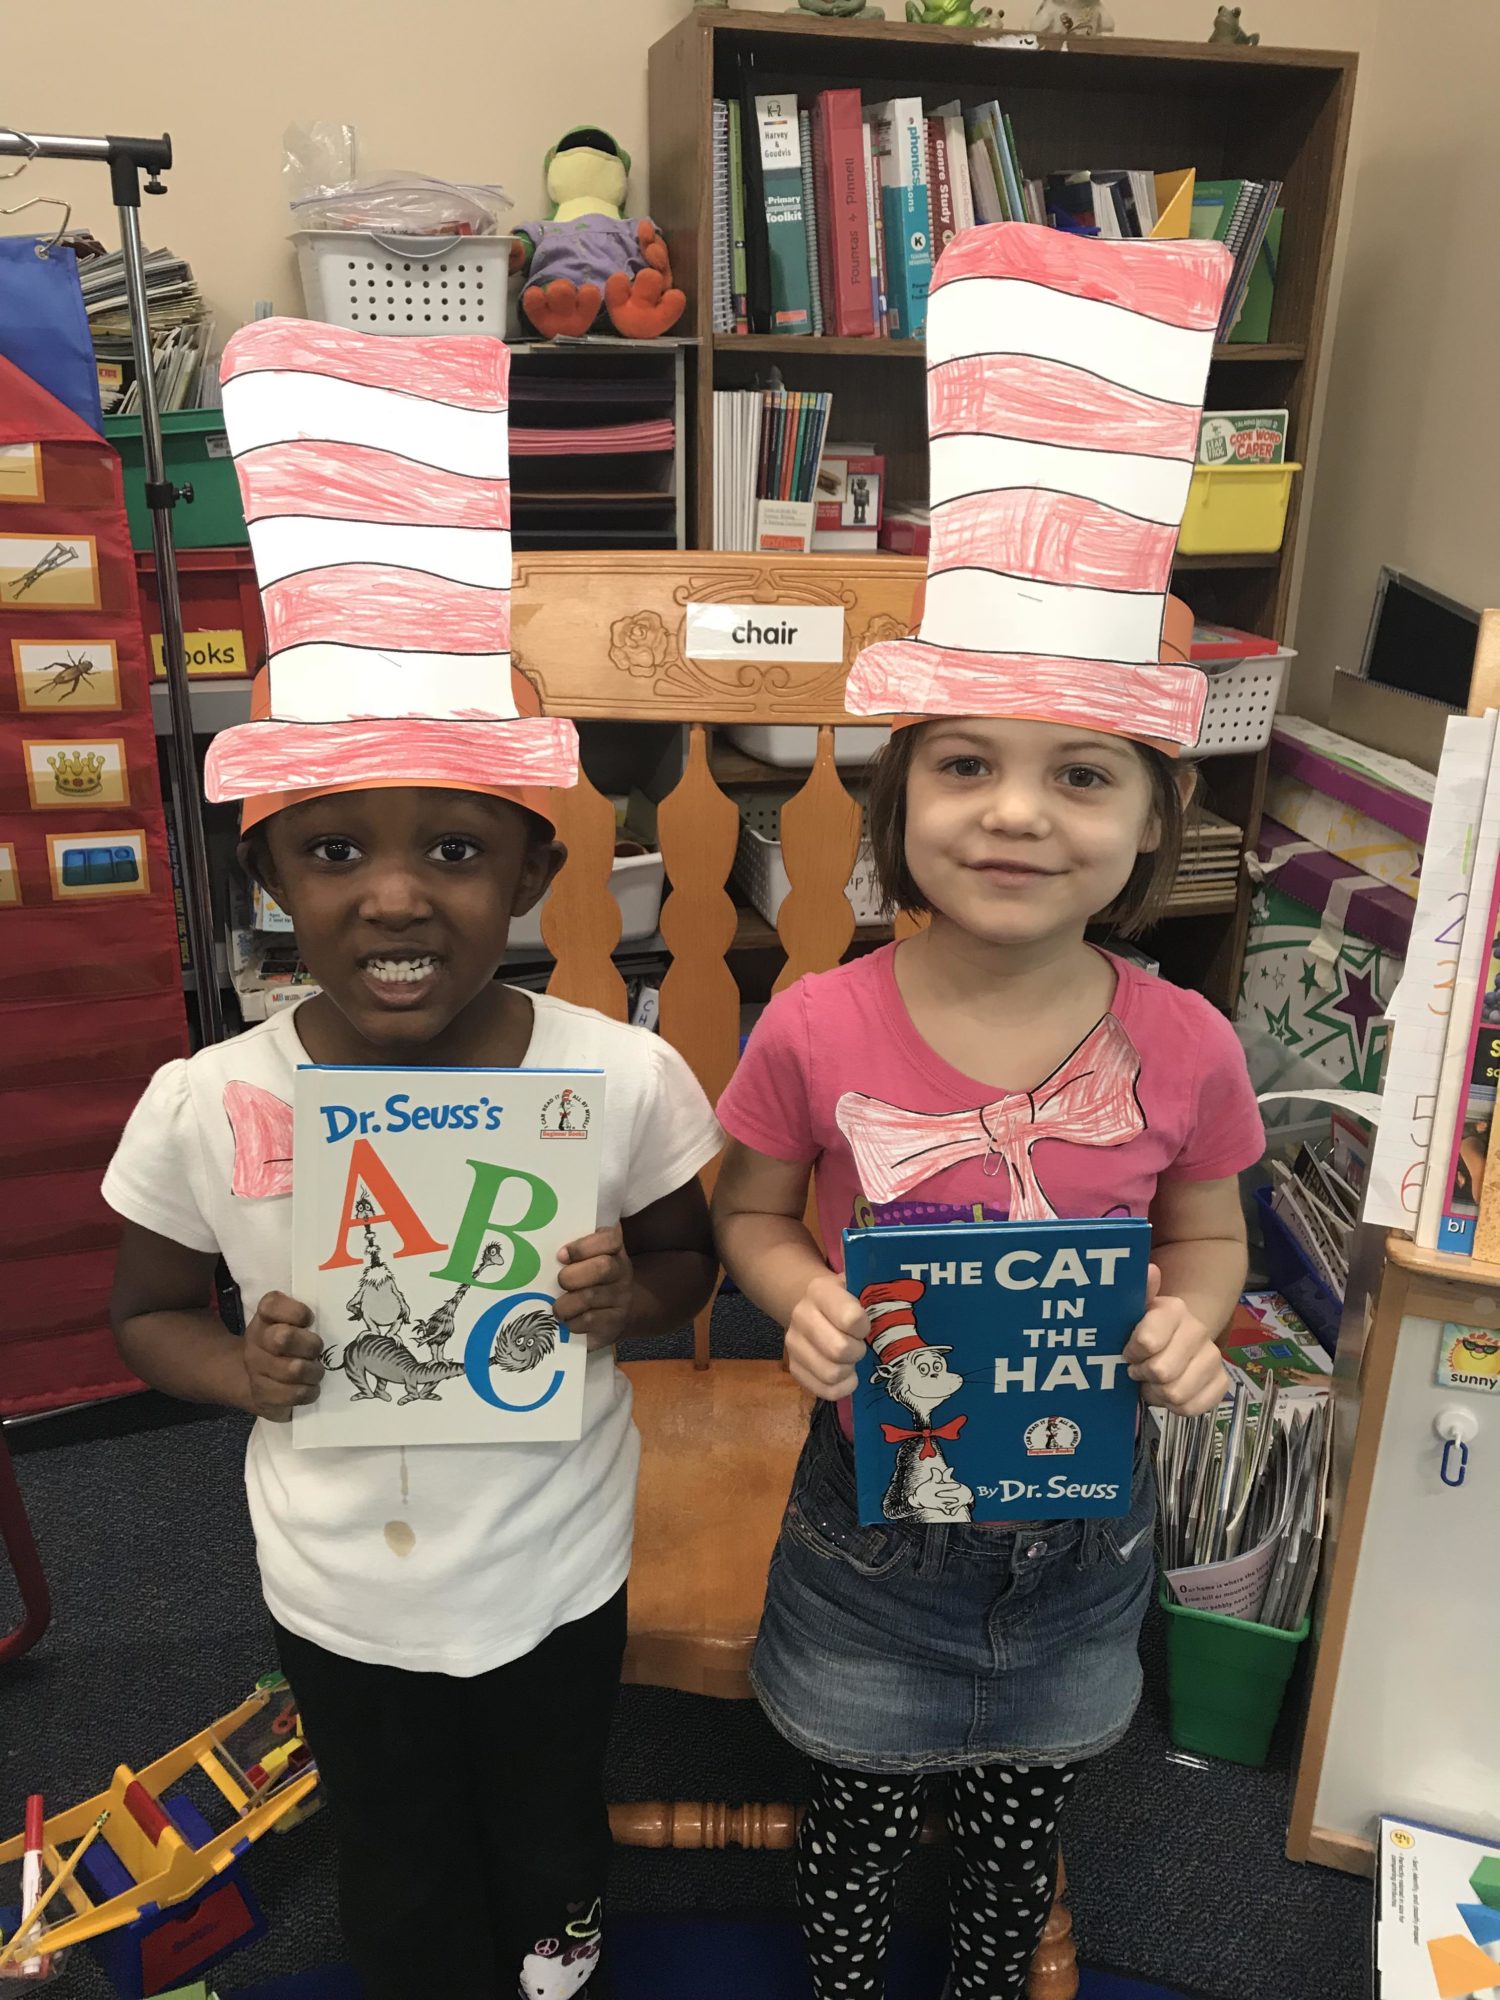 "two students pose with Dr. Seuss books and hats"